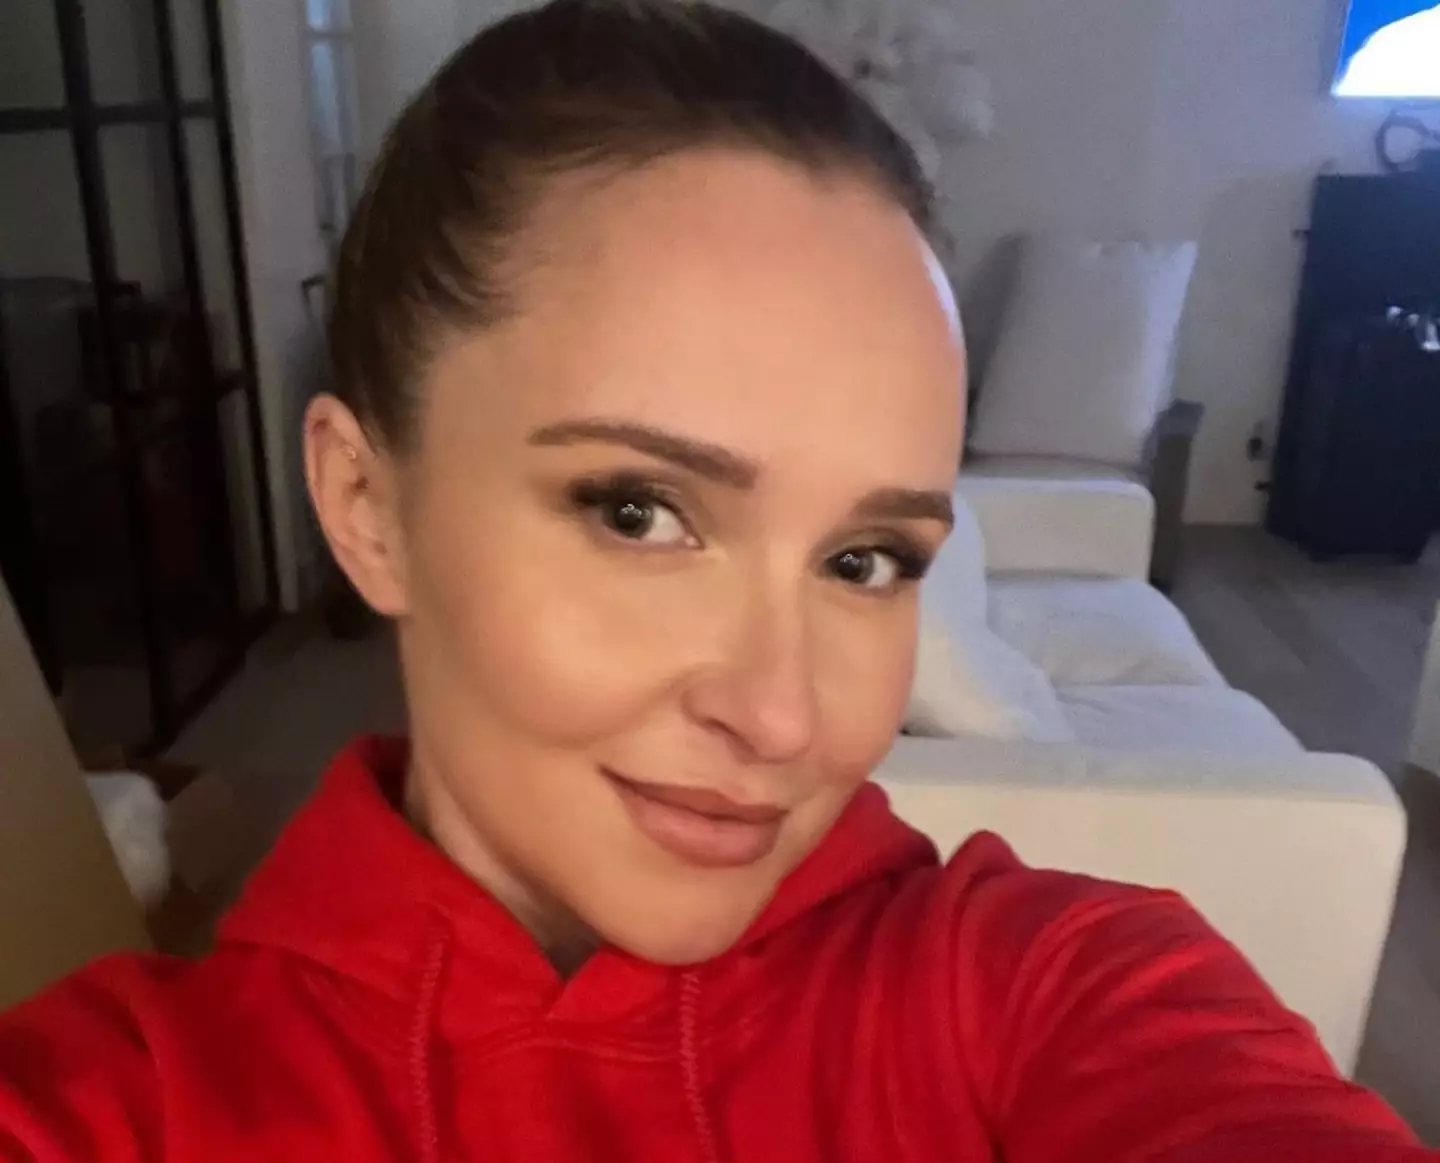 Panettiere checked herself into rehab amid her mental health issues.